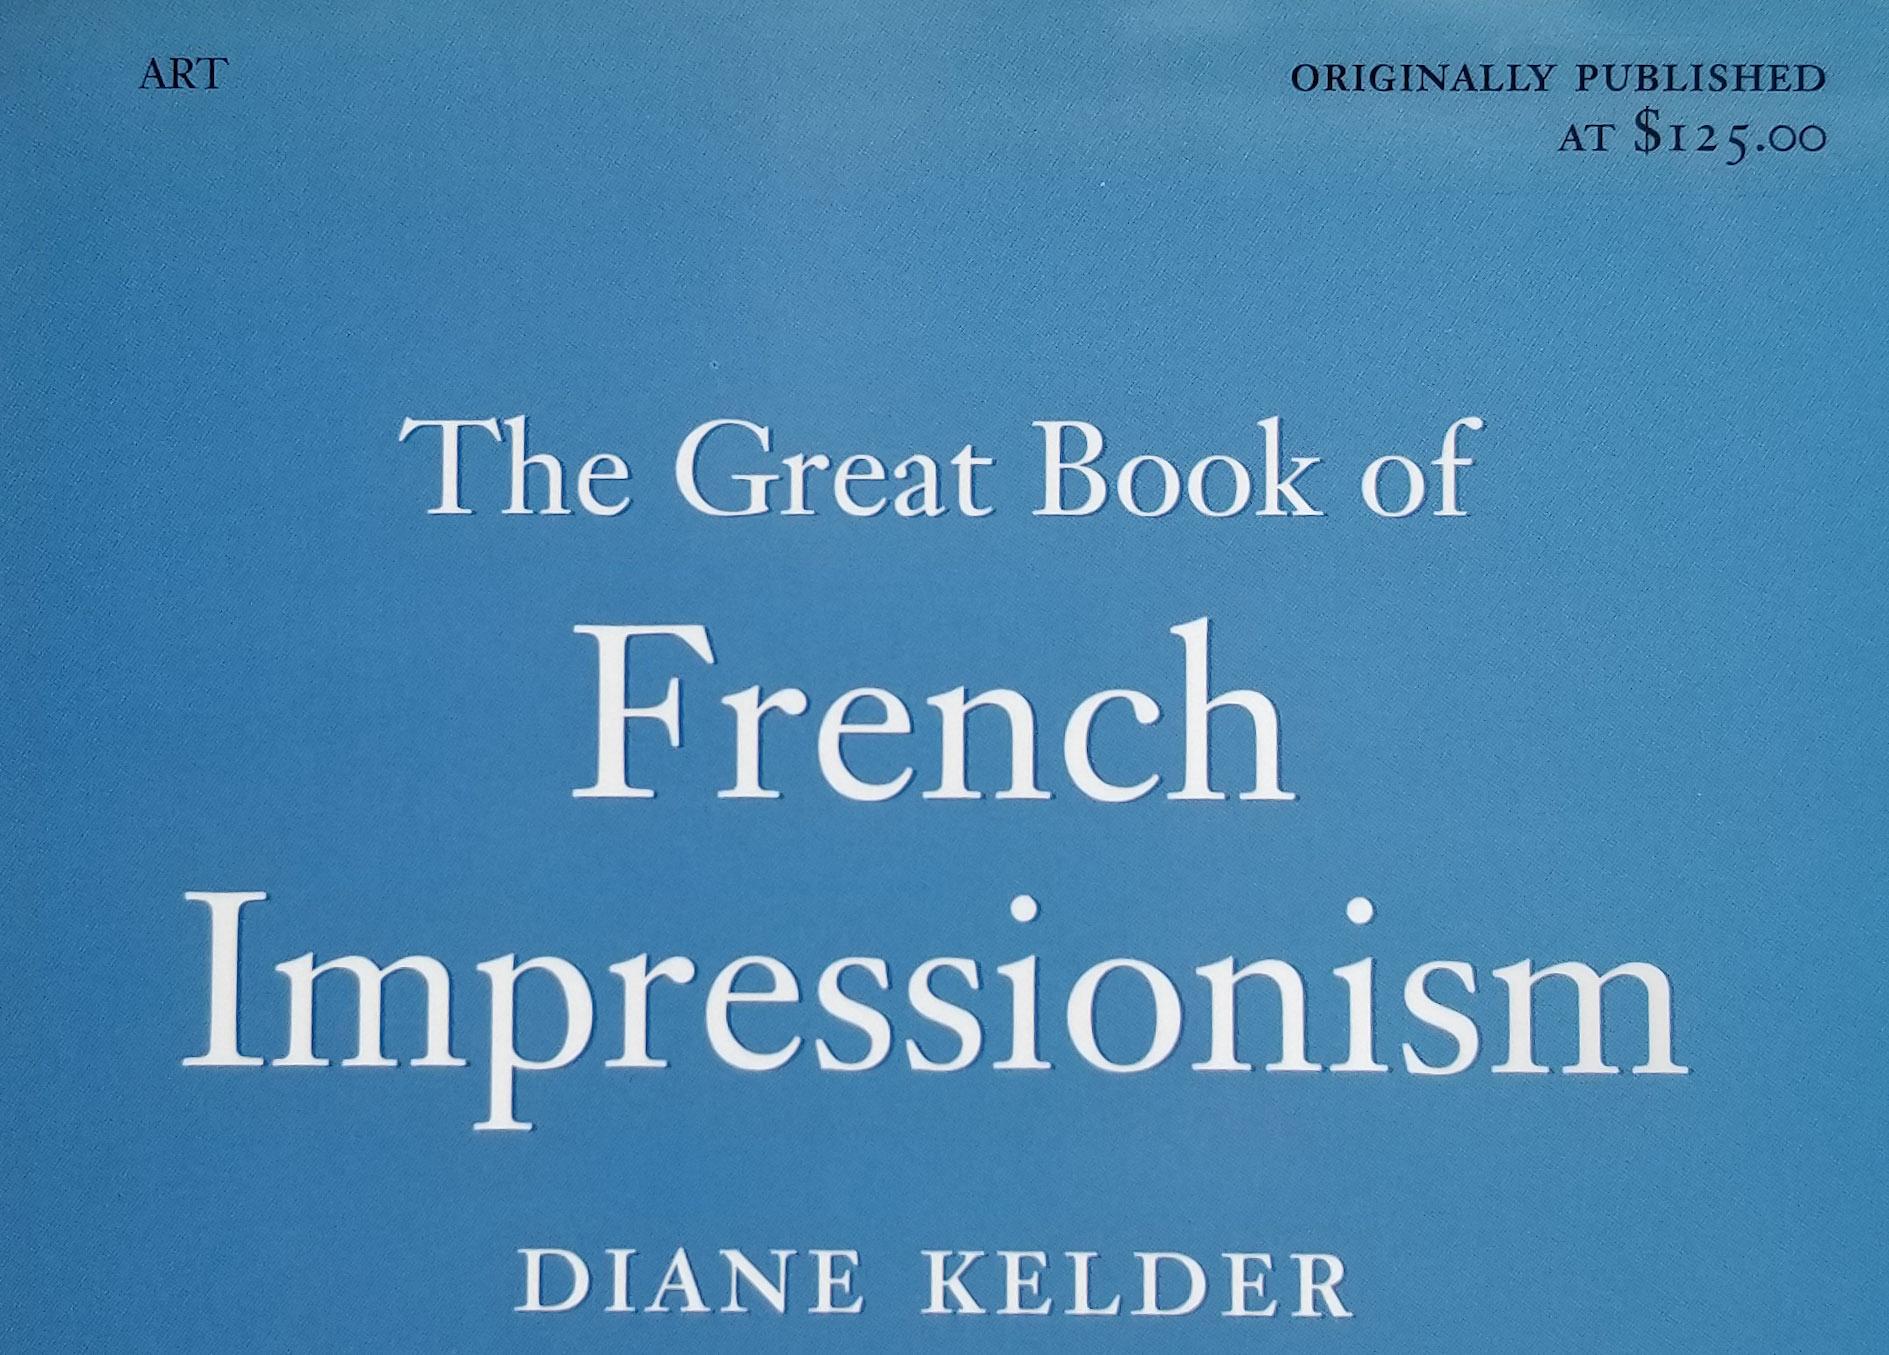 The Great Book of French Impressionism by Diane Kelder. Published by Artabras, a division of Abbeville Publishing Group. Large hardcover with dust jacket, 400 pages, 400 illustrations, 229 in full color. A great coffee table book!!.
 